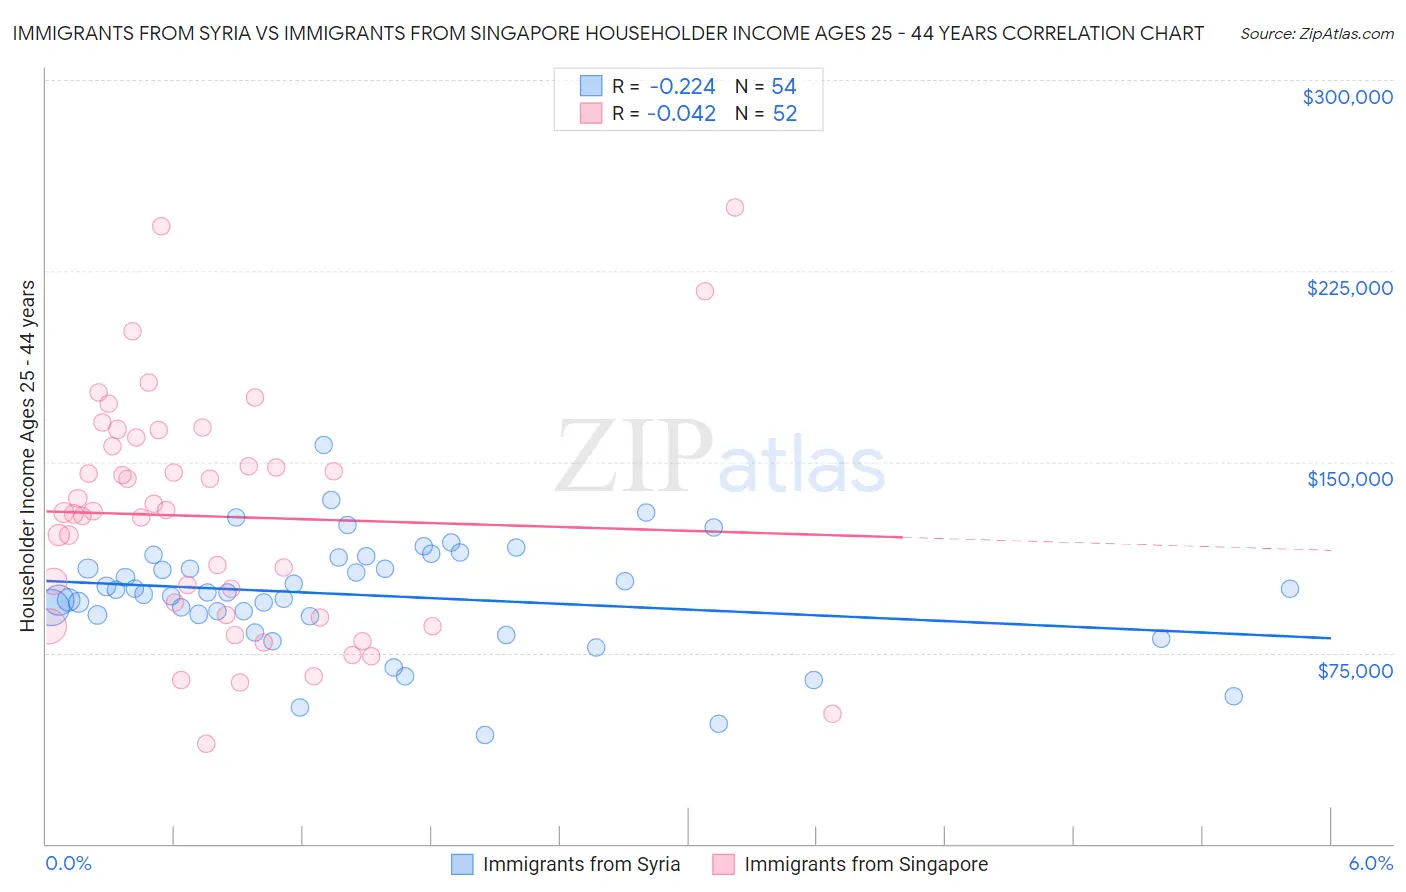 Immigrants from Syria vs Immigrants from Singapore Householder Income Ages 25 - 44 years